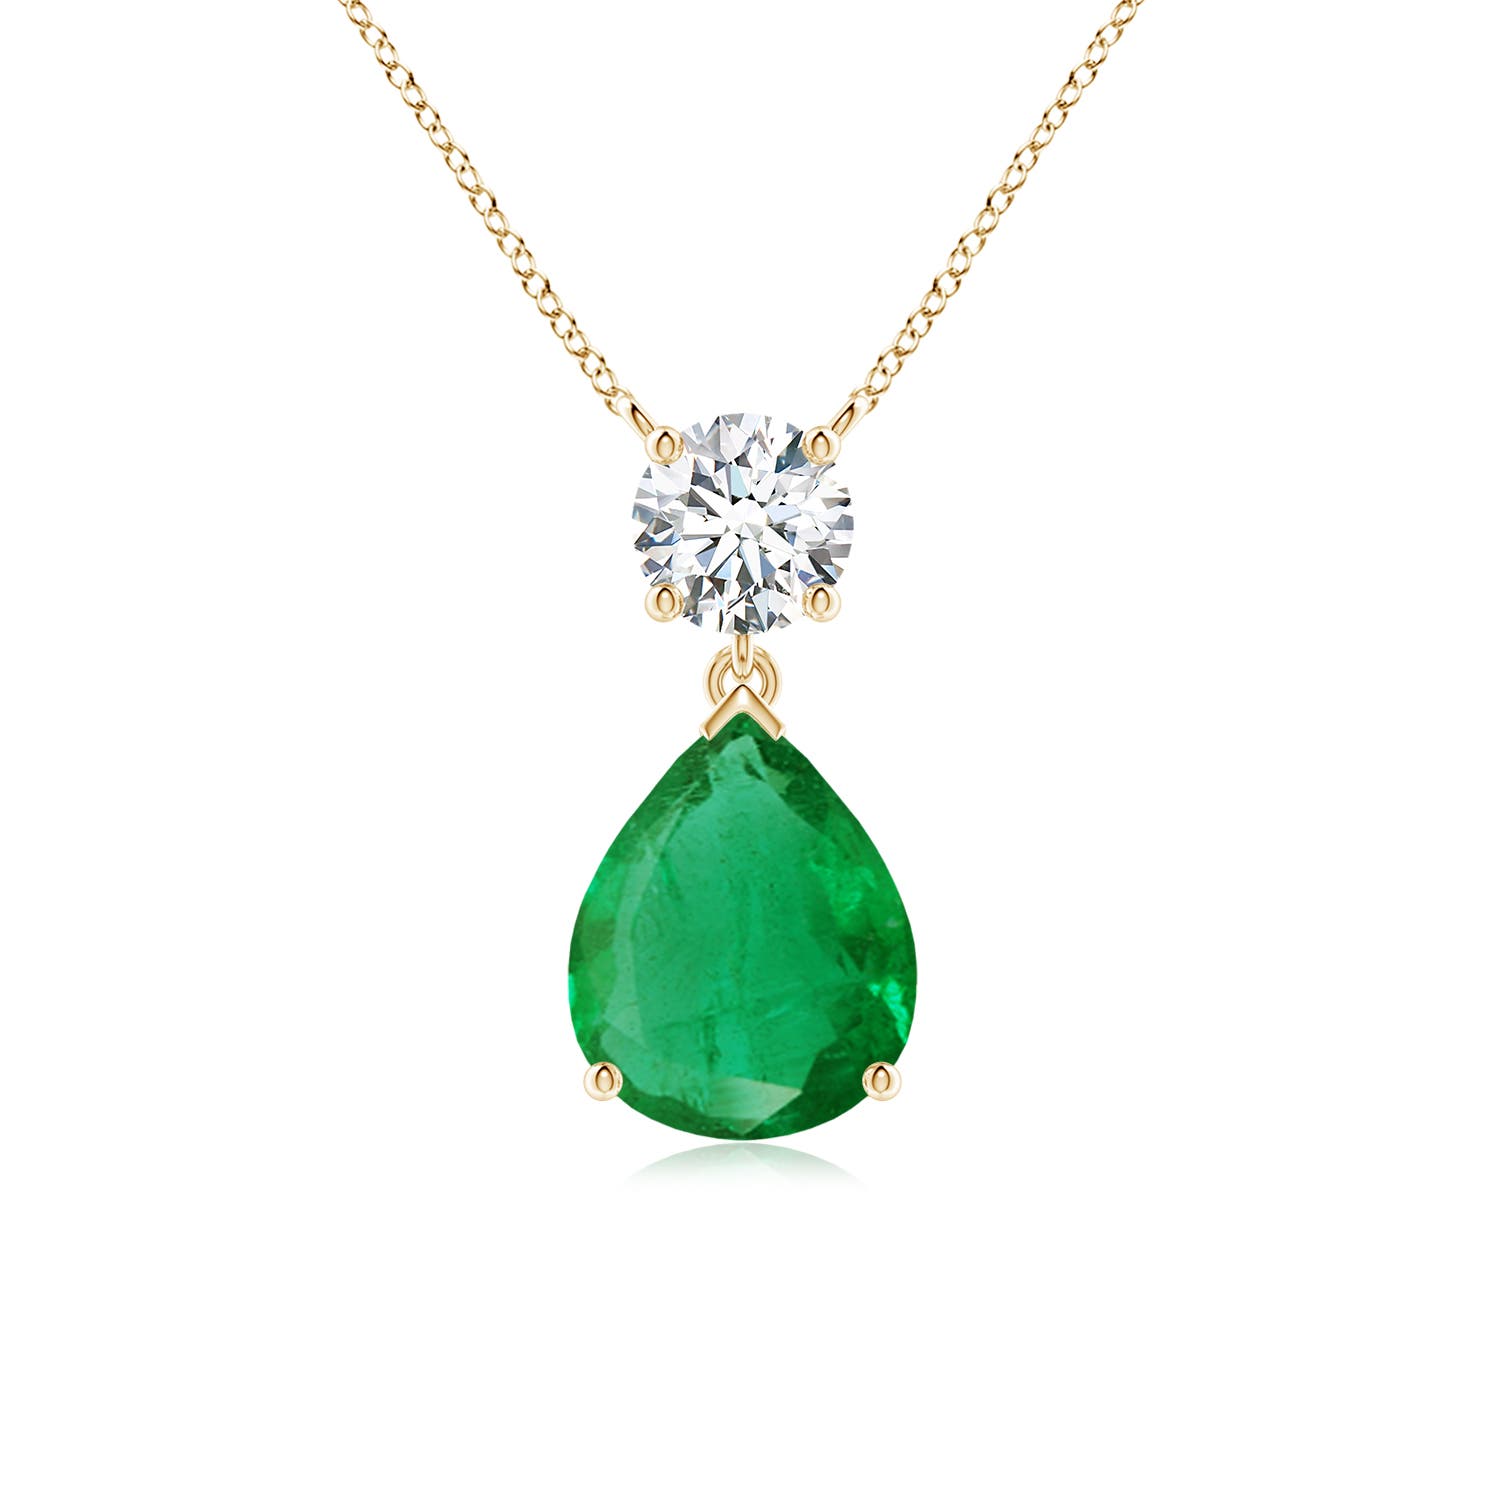 AA - Emerald / 3 CT / 18 KT Yellow Gold